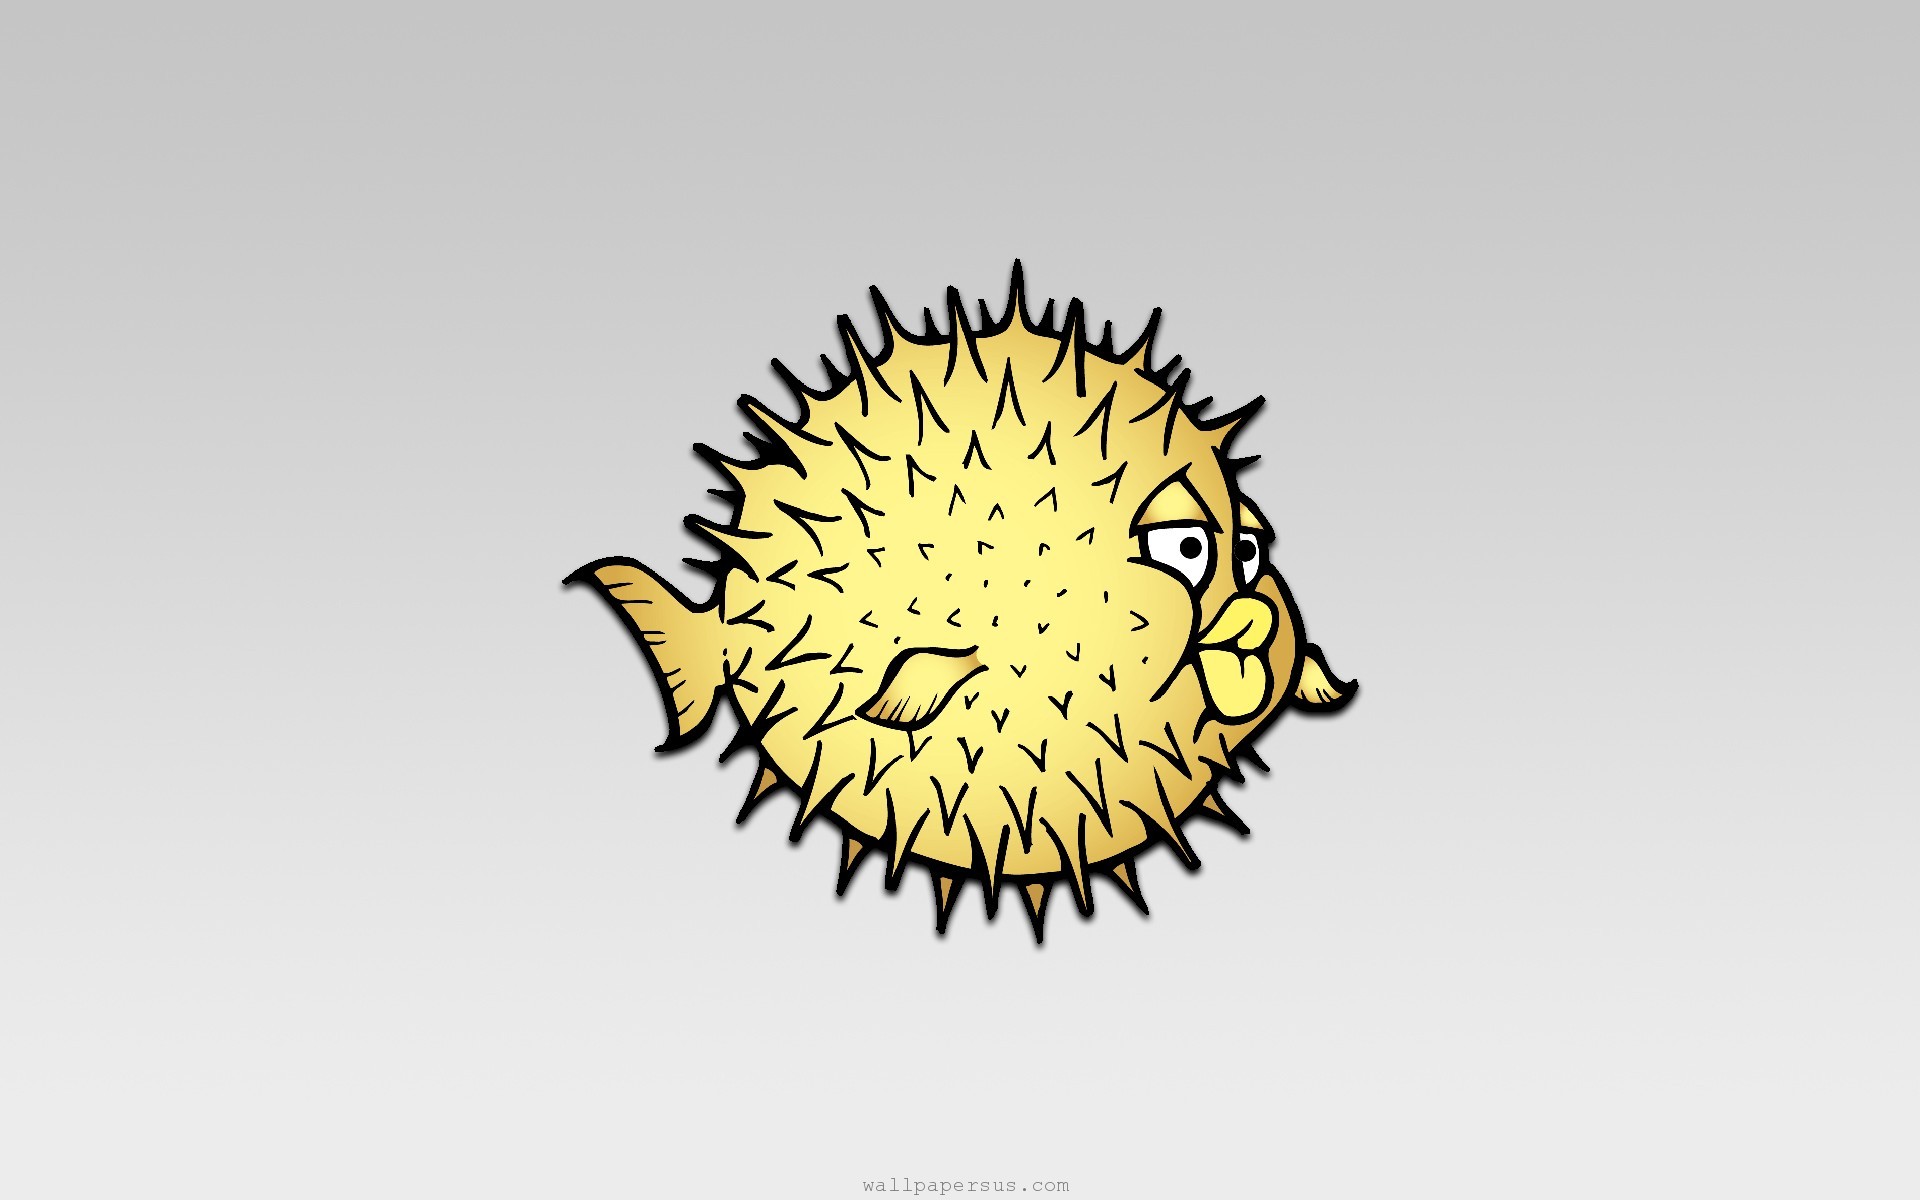 Tutorial: How to install OpenBSD 6.1, step by step